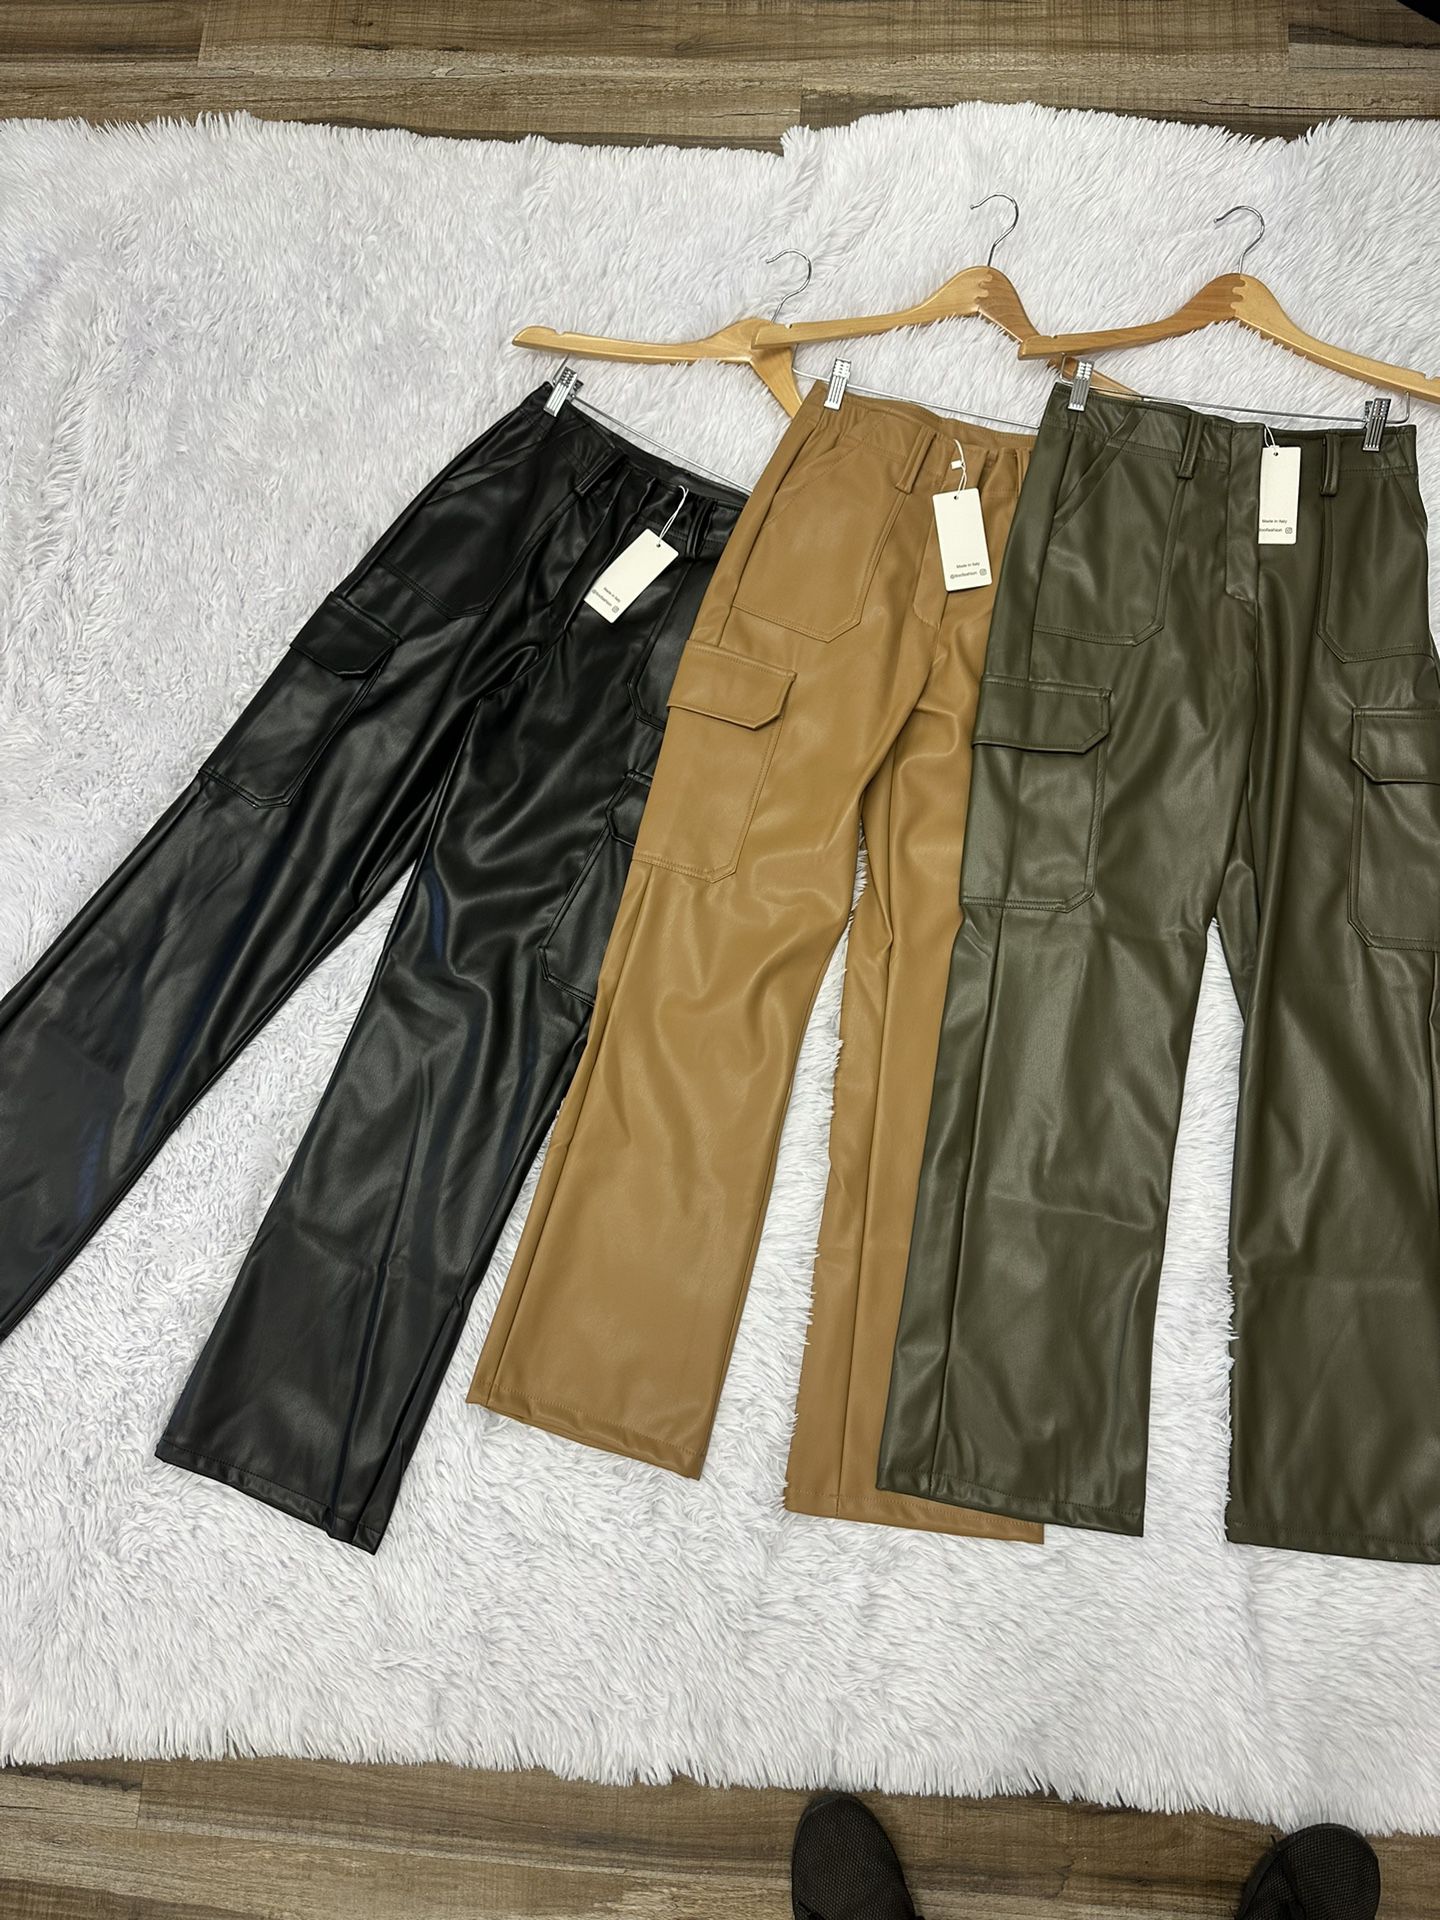 Leather Cargo Pants Green Brown Black Brand New Small Medium Large 36.99